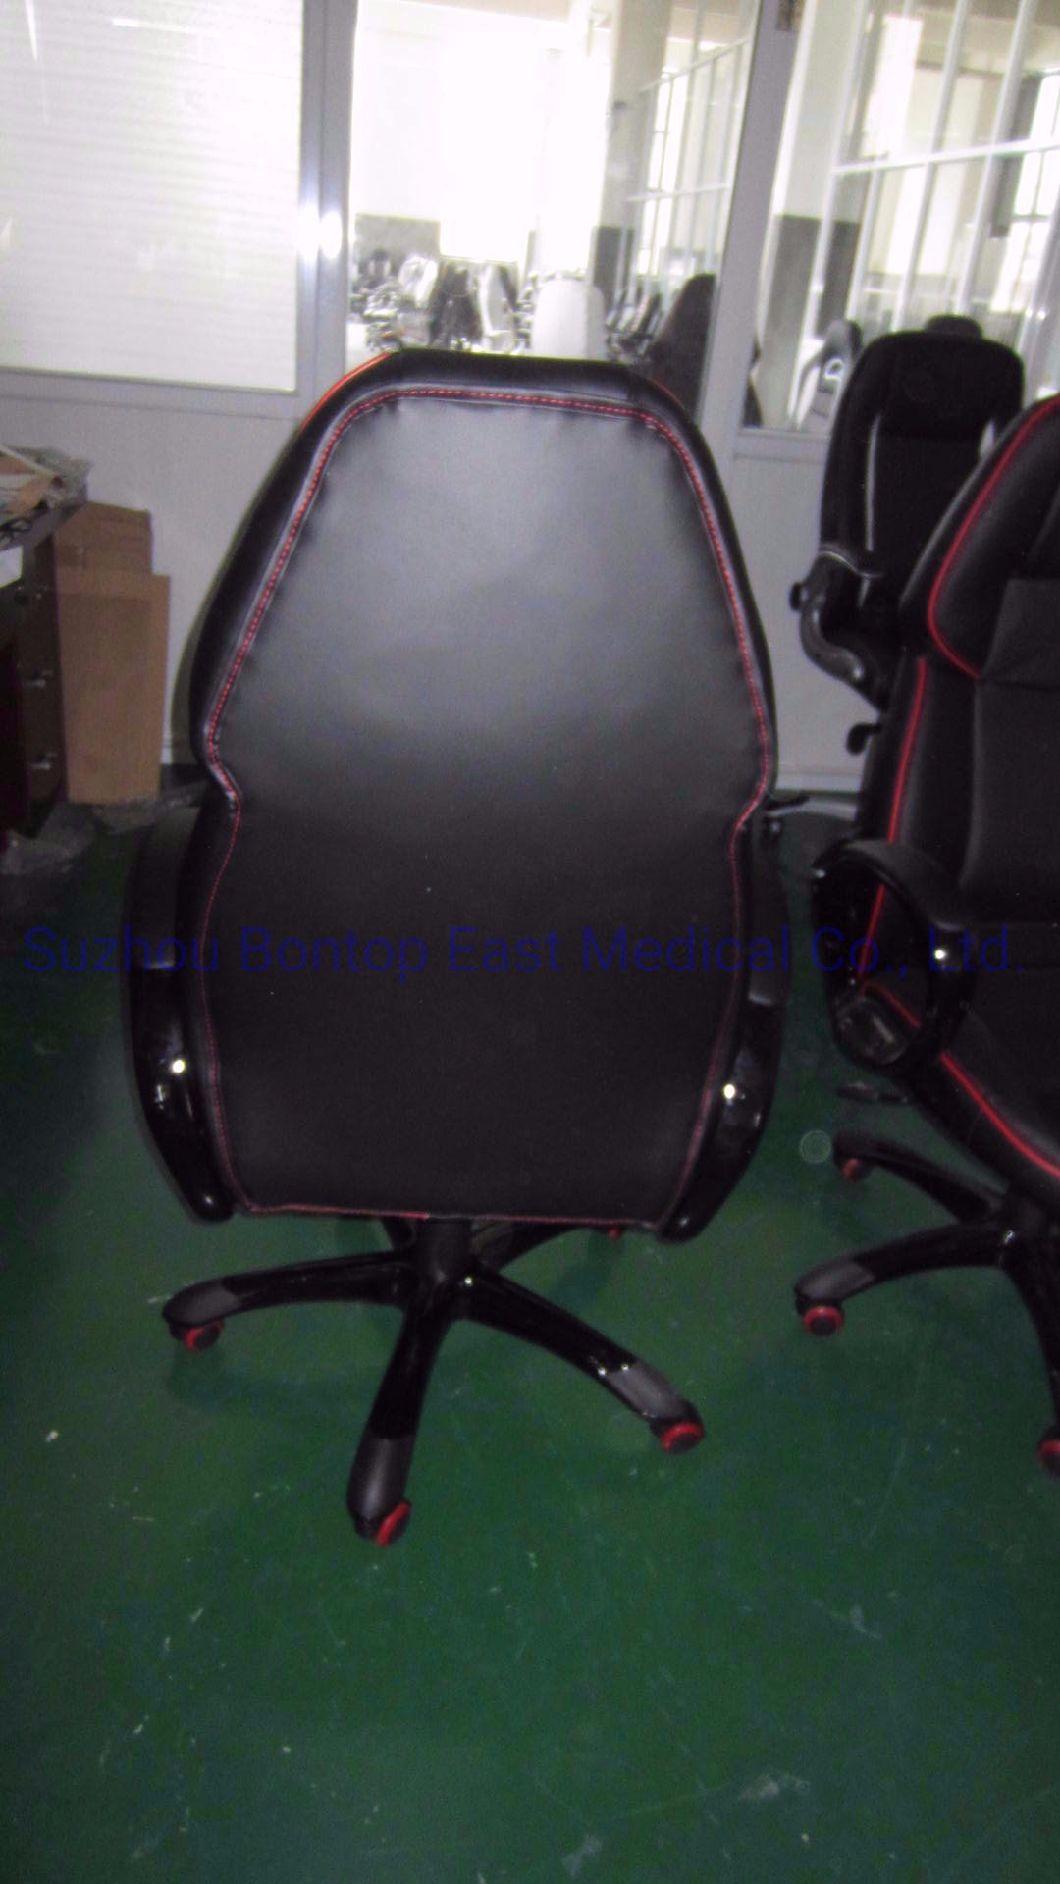 Comfortable Office Furniture High Back Swivel Ergonomic Boss Manager Computer Conference PU Leather Office Chair